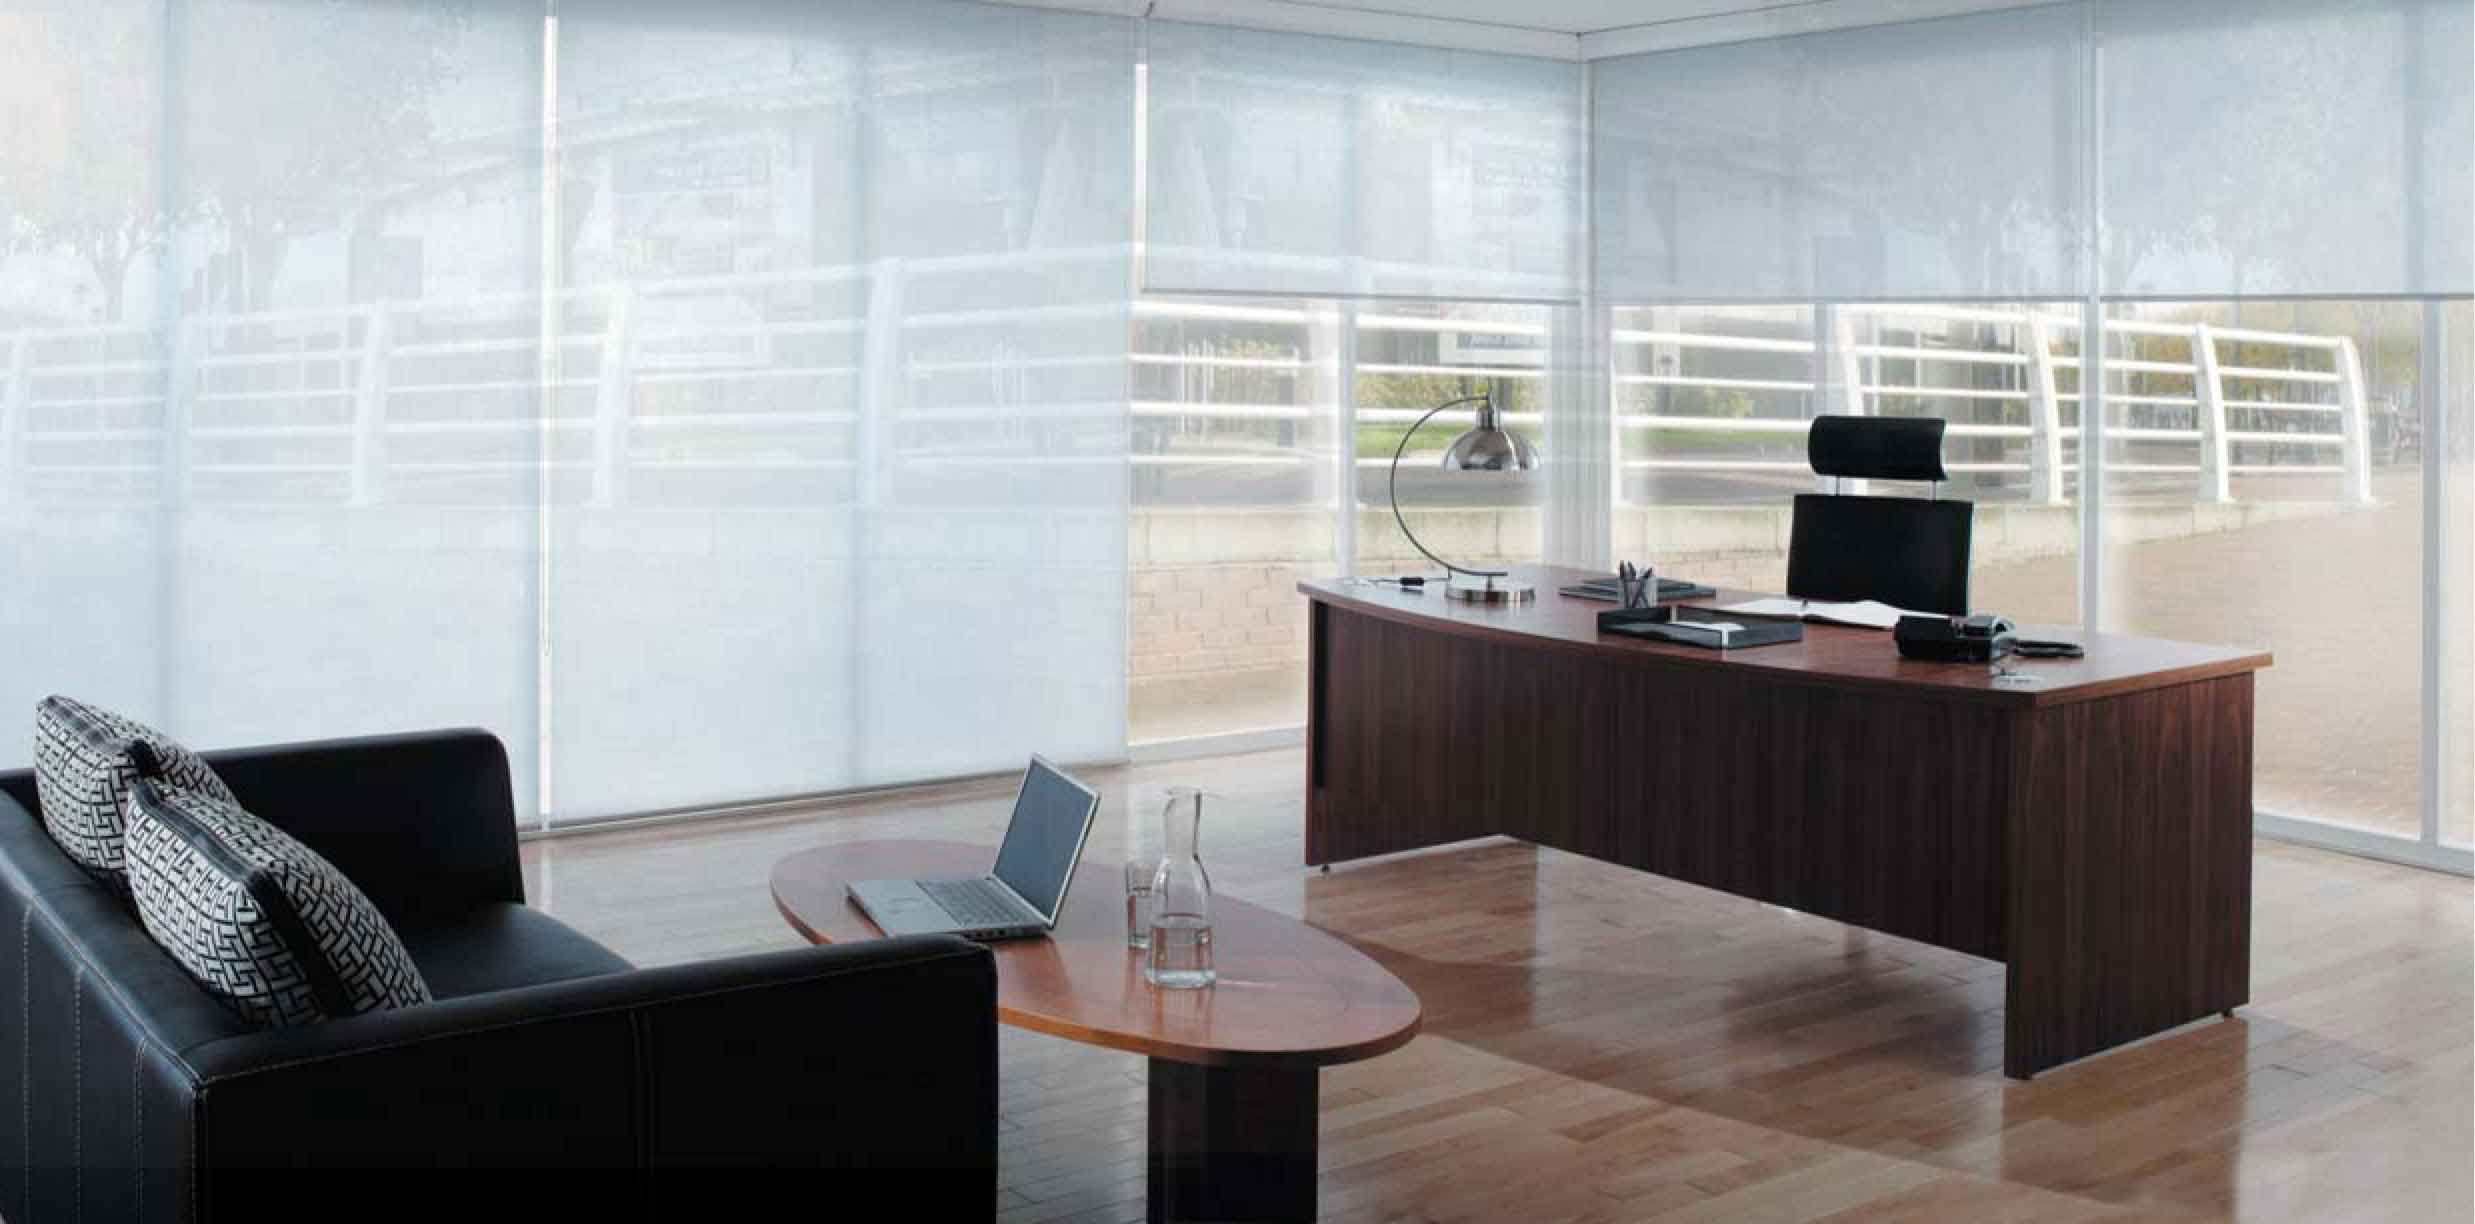 Perspective Windspray Grey 3% Open Screen Roller Blind with White Half Round Valance